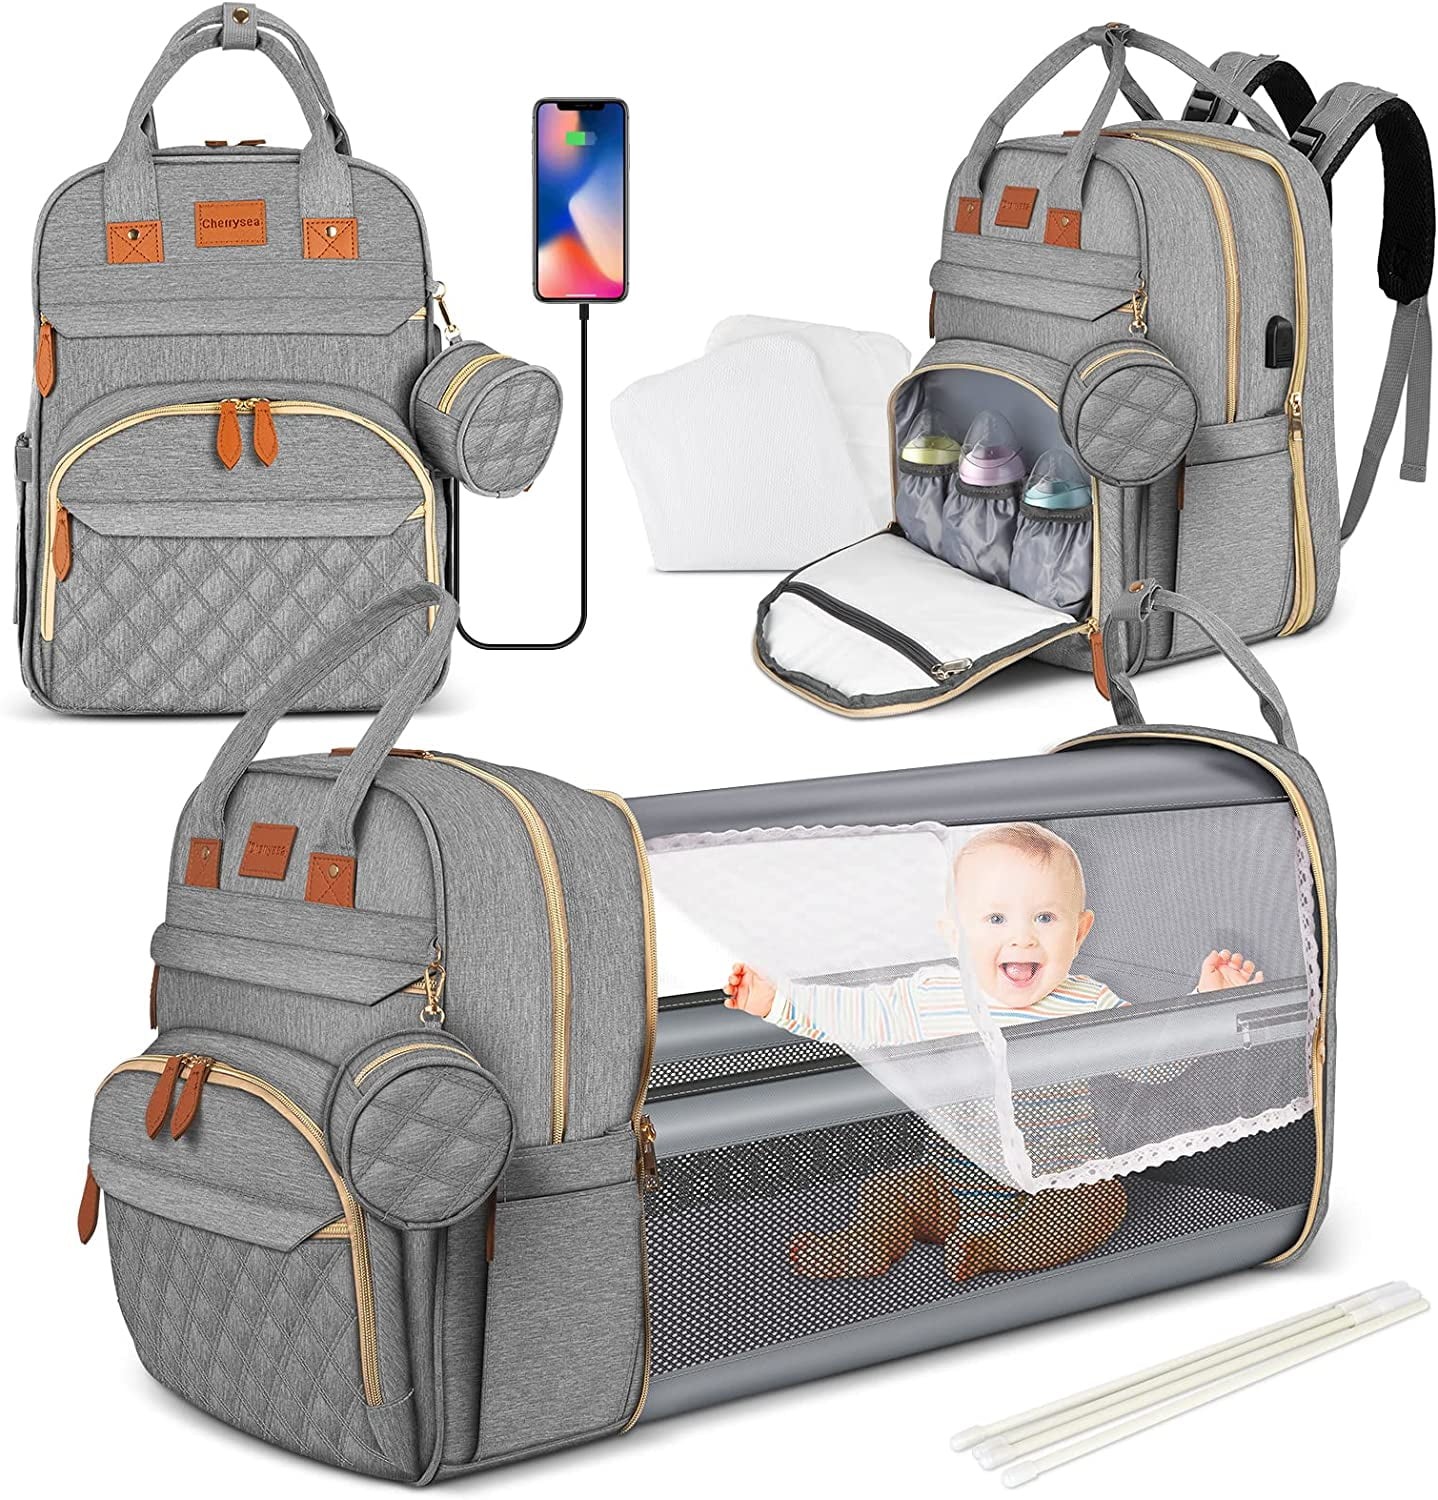 Diaper Bag Backpack Nappy Changing Bag with USB Charging Port